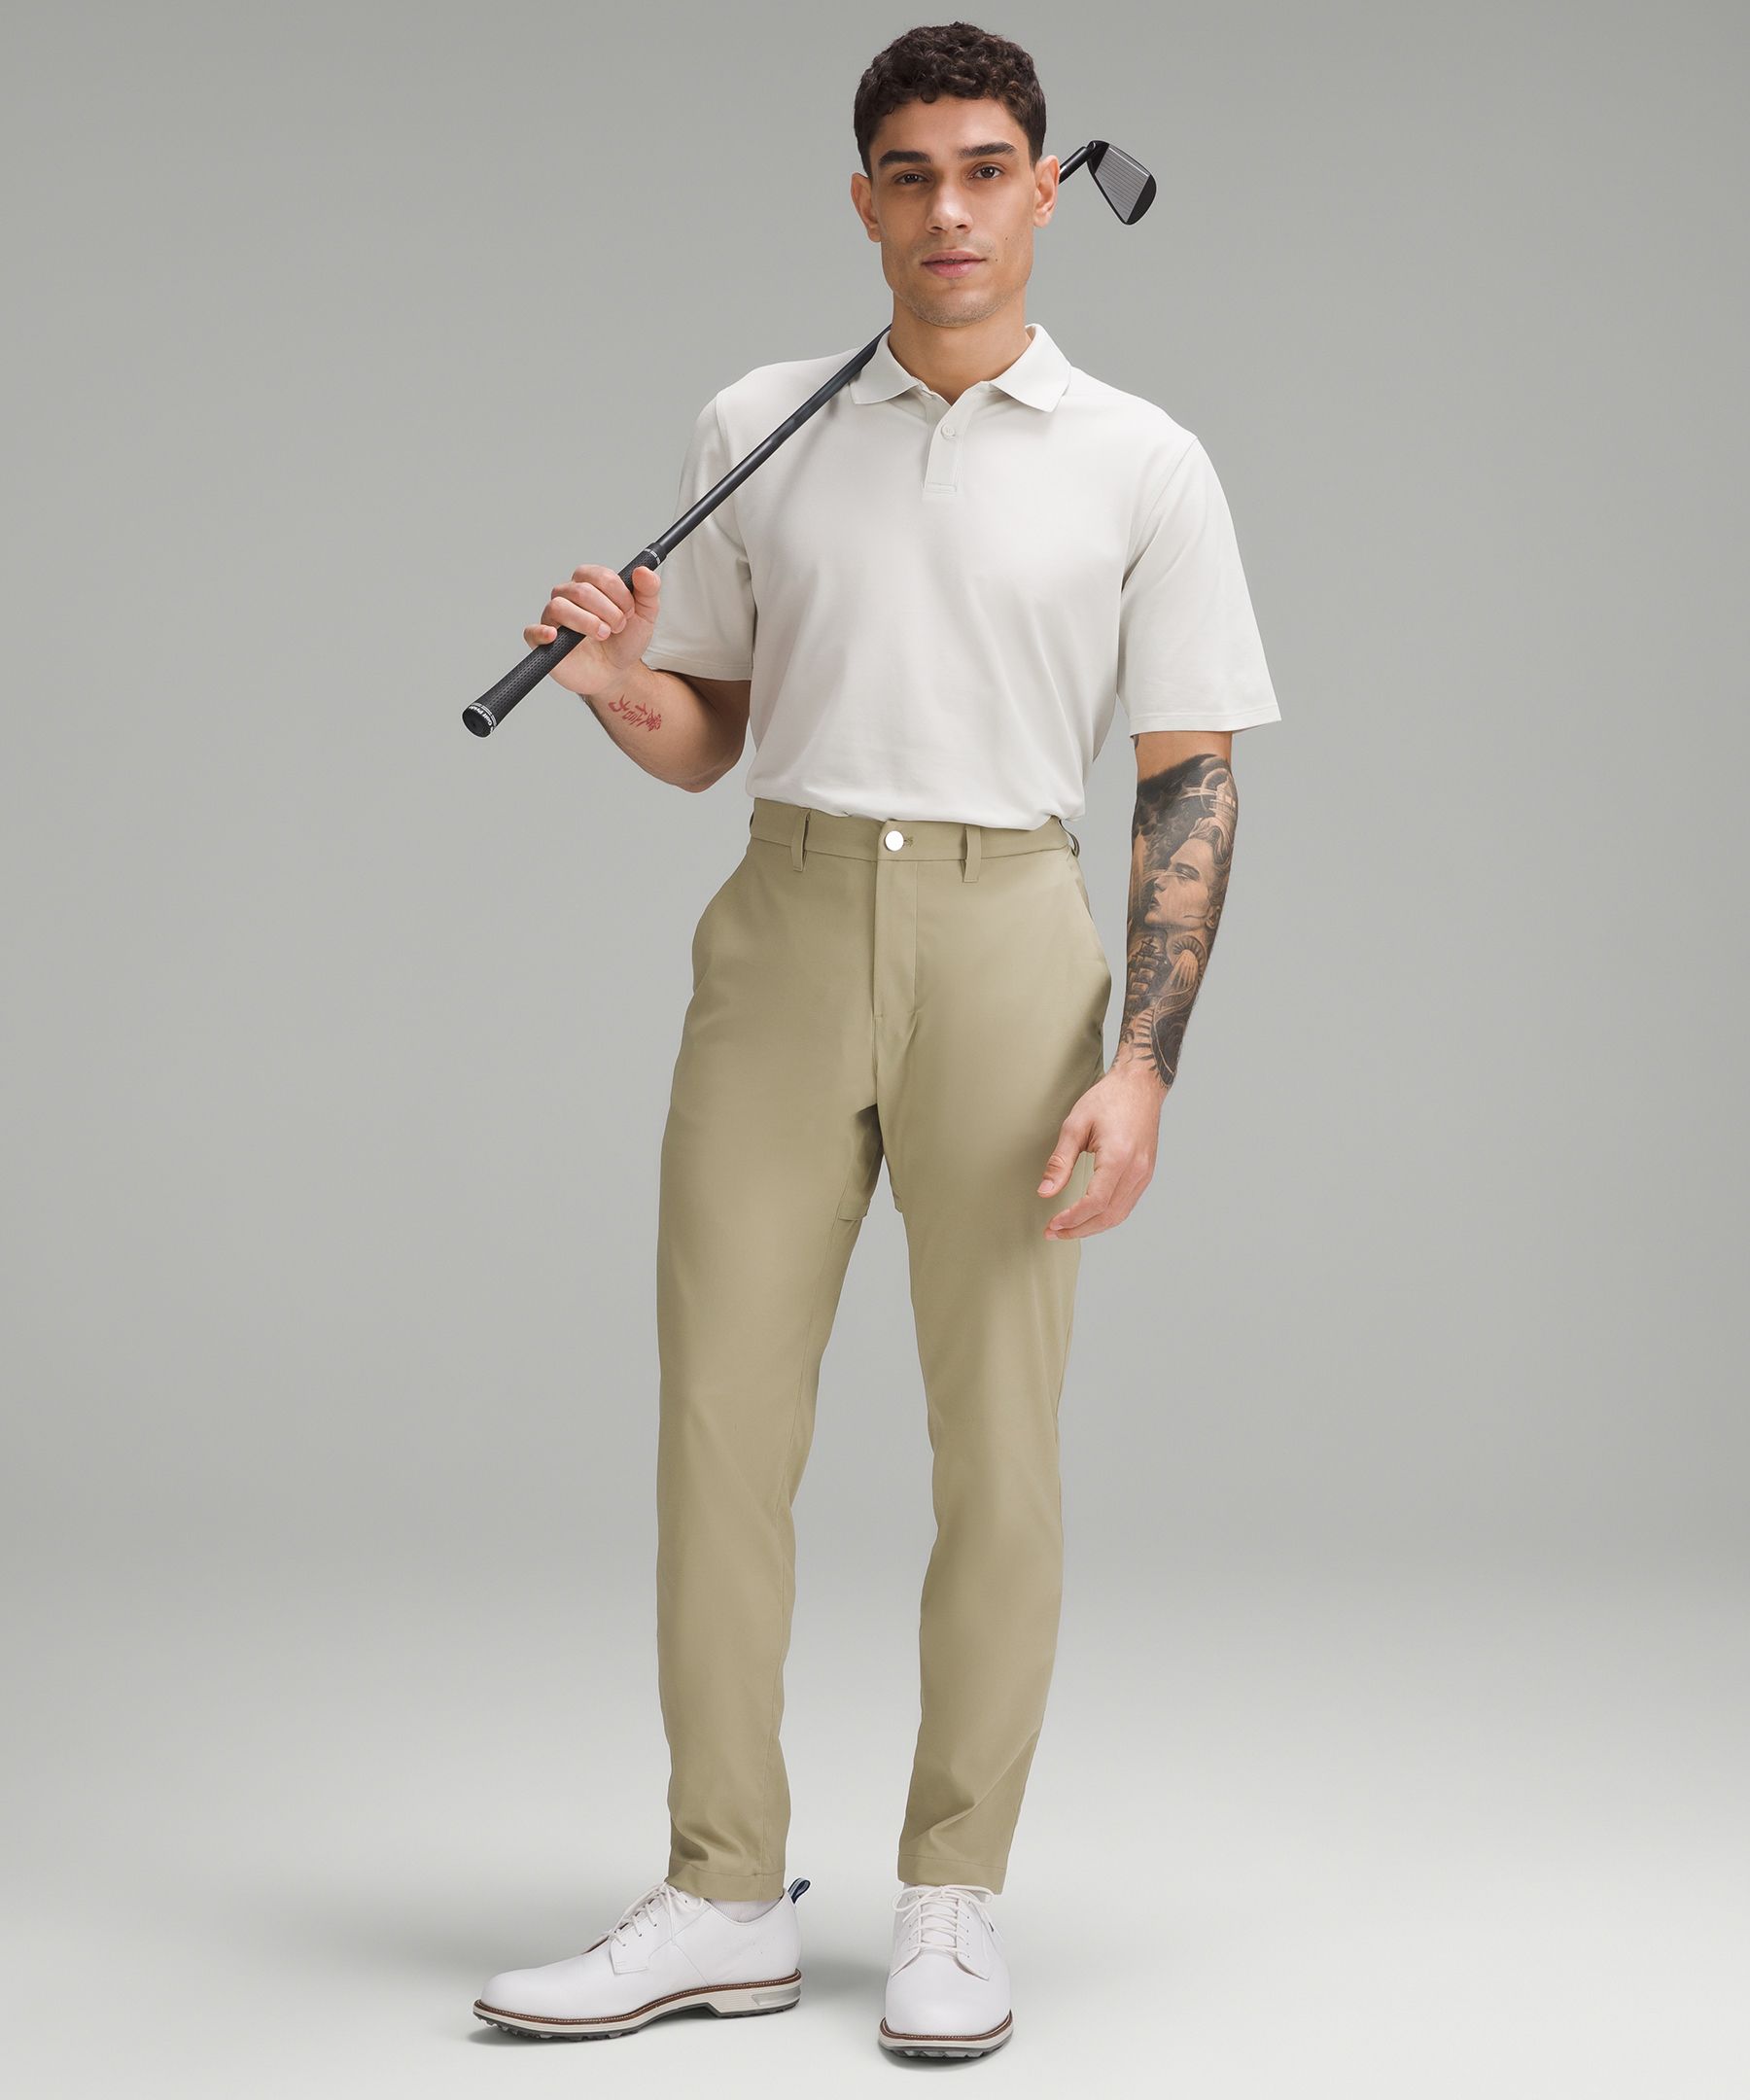 TikTok swears these men's golf pants from  are a more affordable  version of Lululemon's ABC Pants